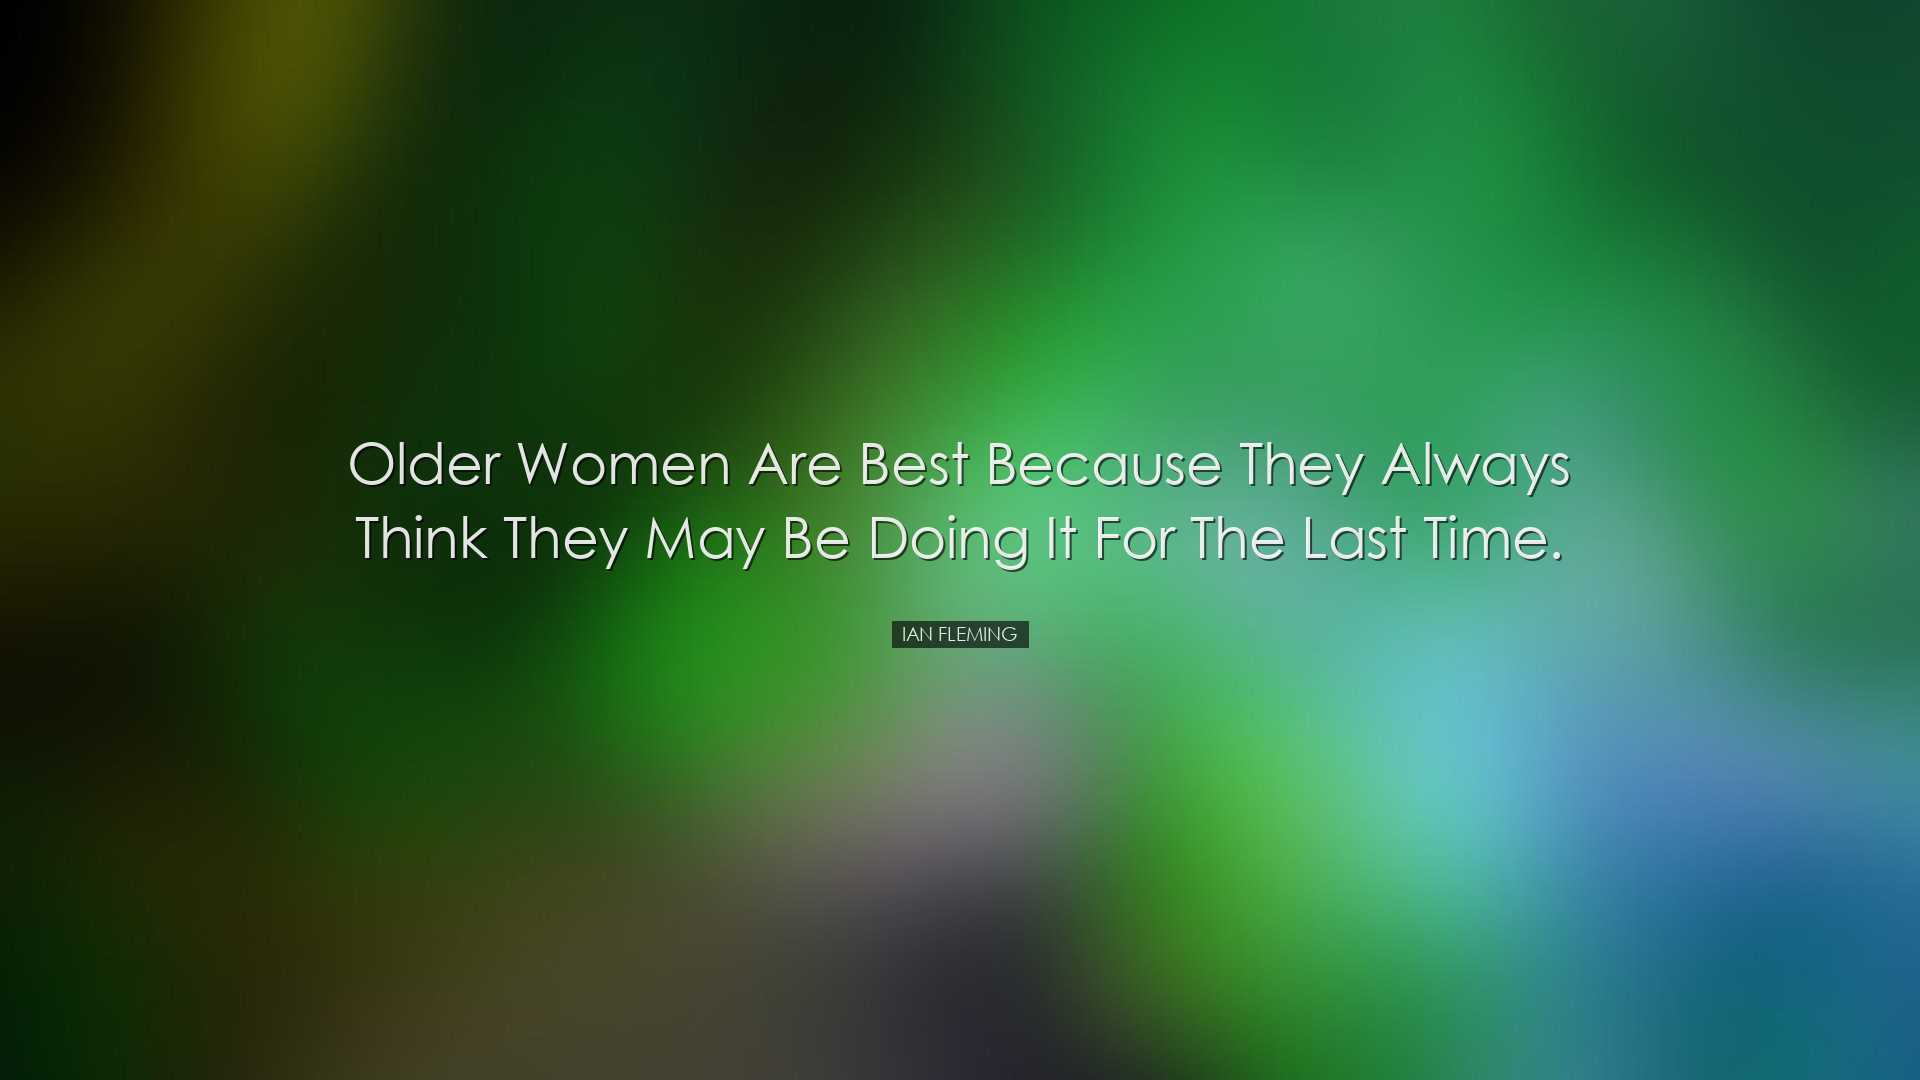 Older women are best because they always think they may be doing i